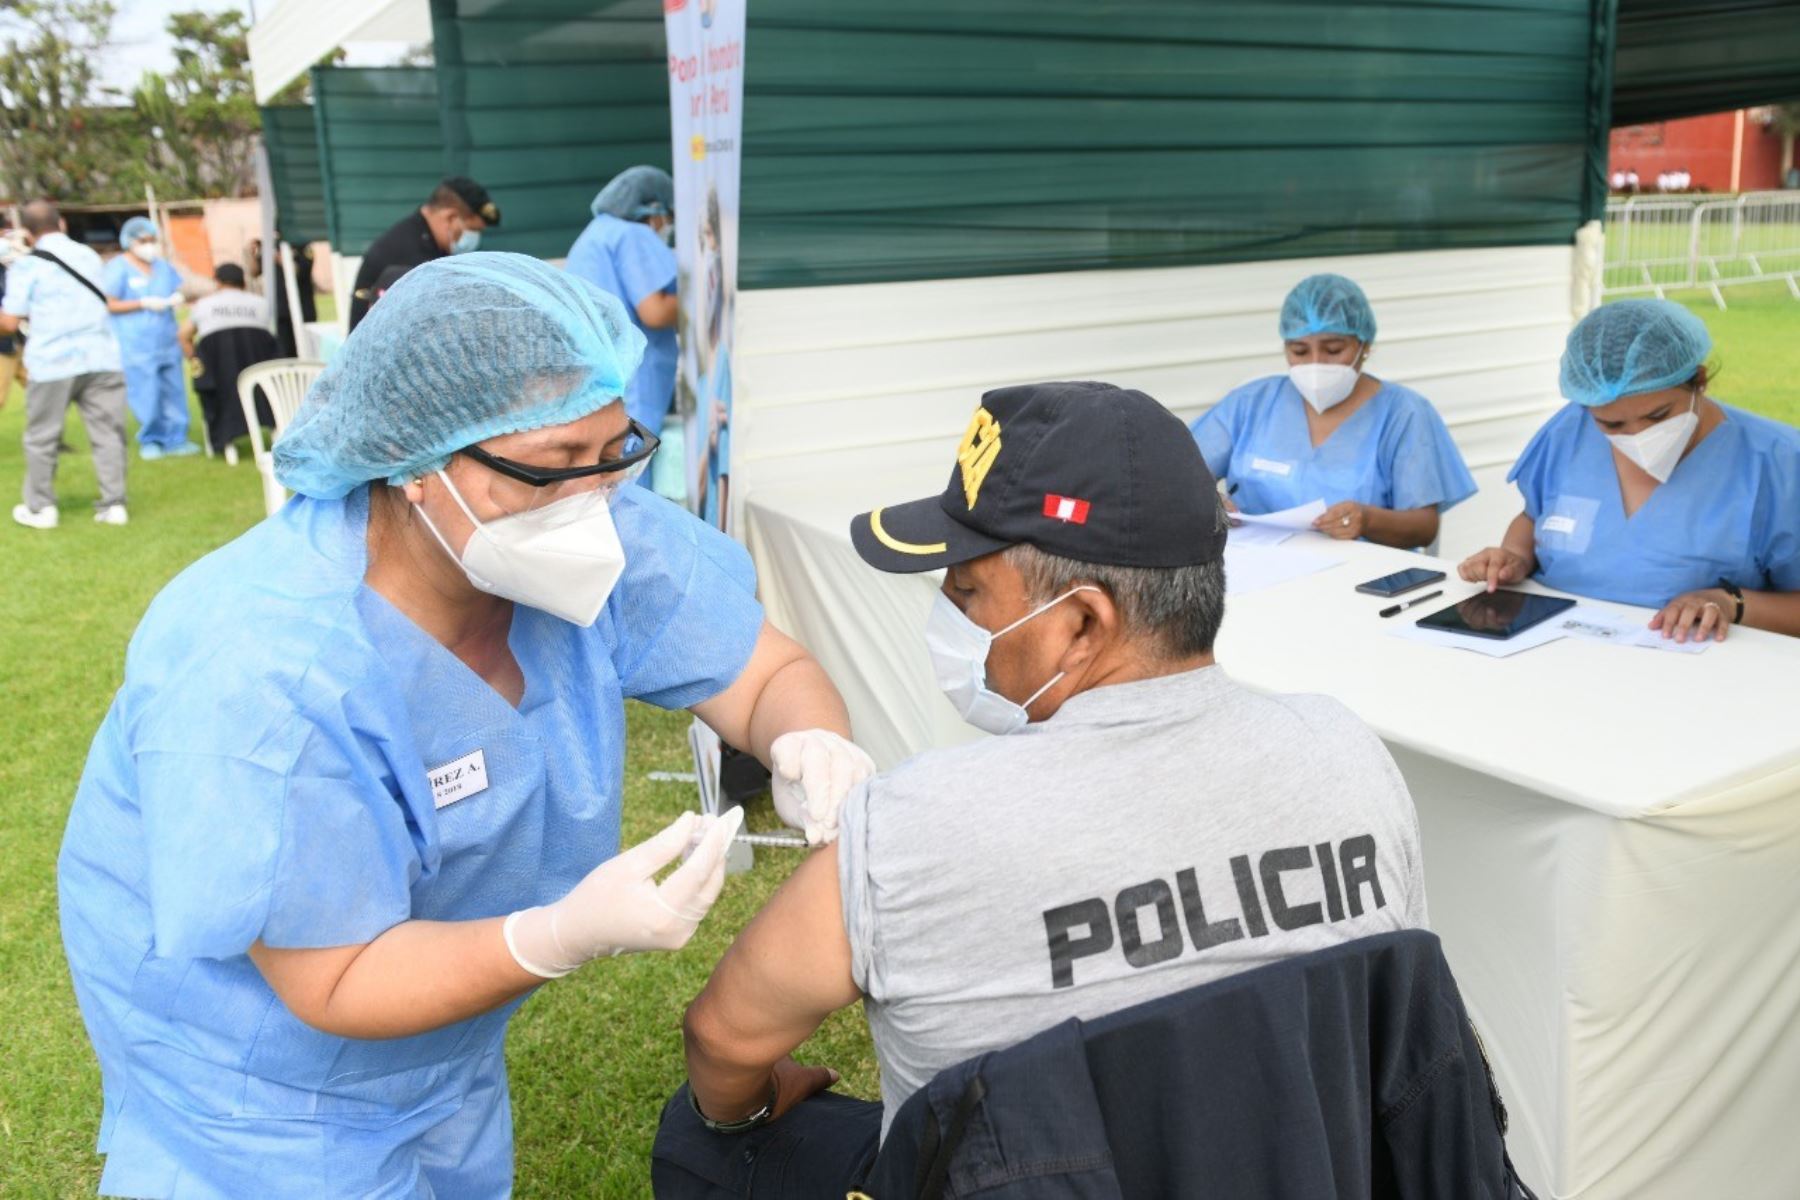 https://andina.pe/Ingles/noticia-nearly-60000-national-police-members-vaccinated-against-covid19-in-peru-838362.aspx